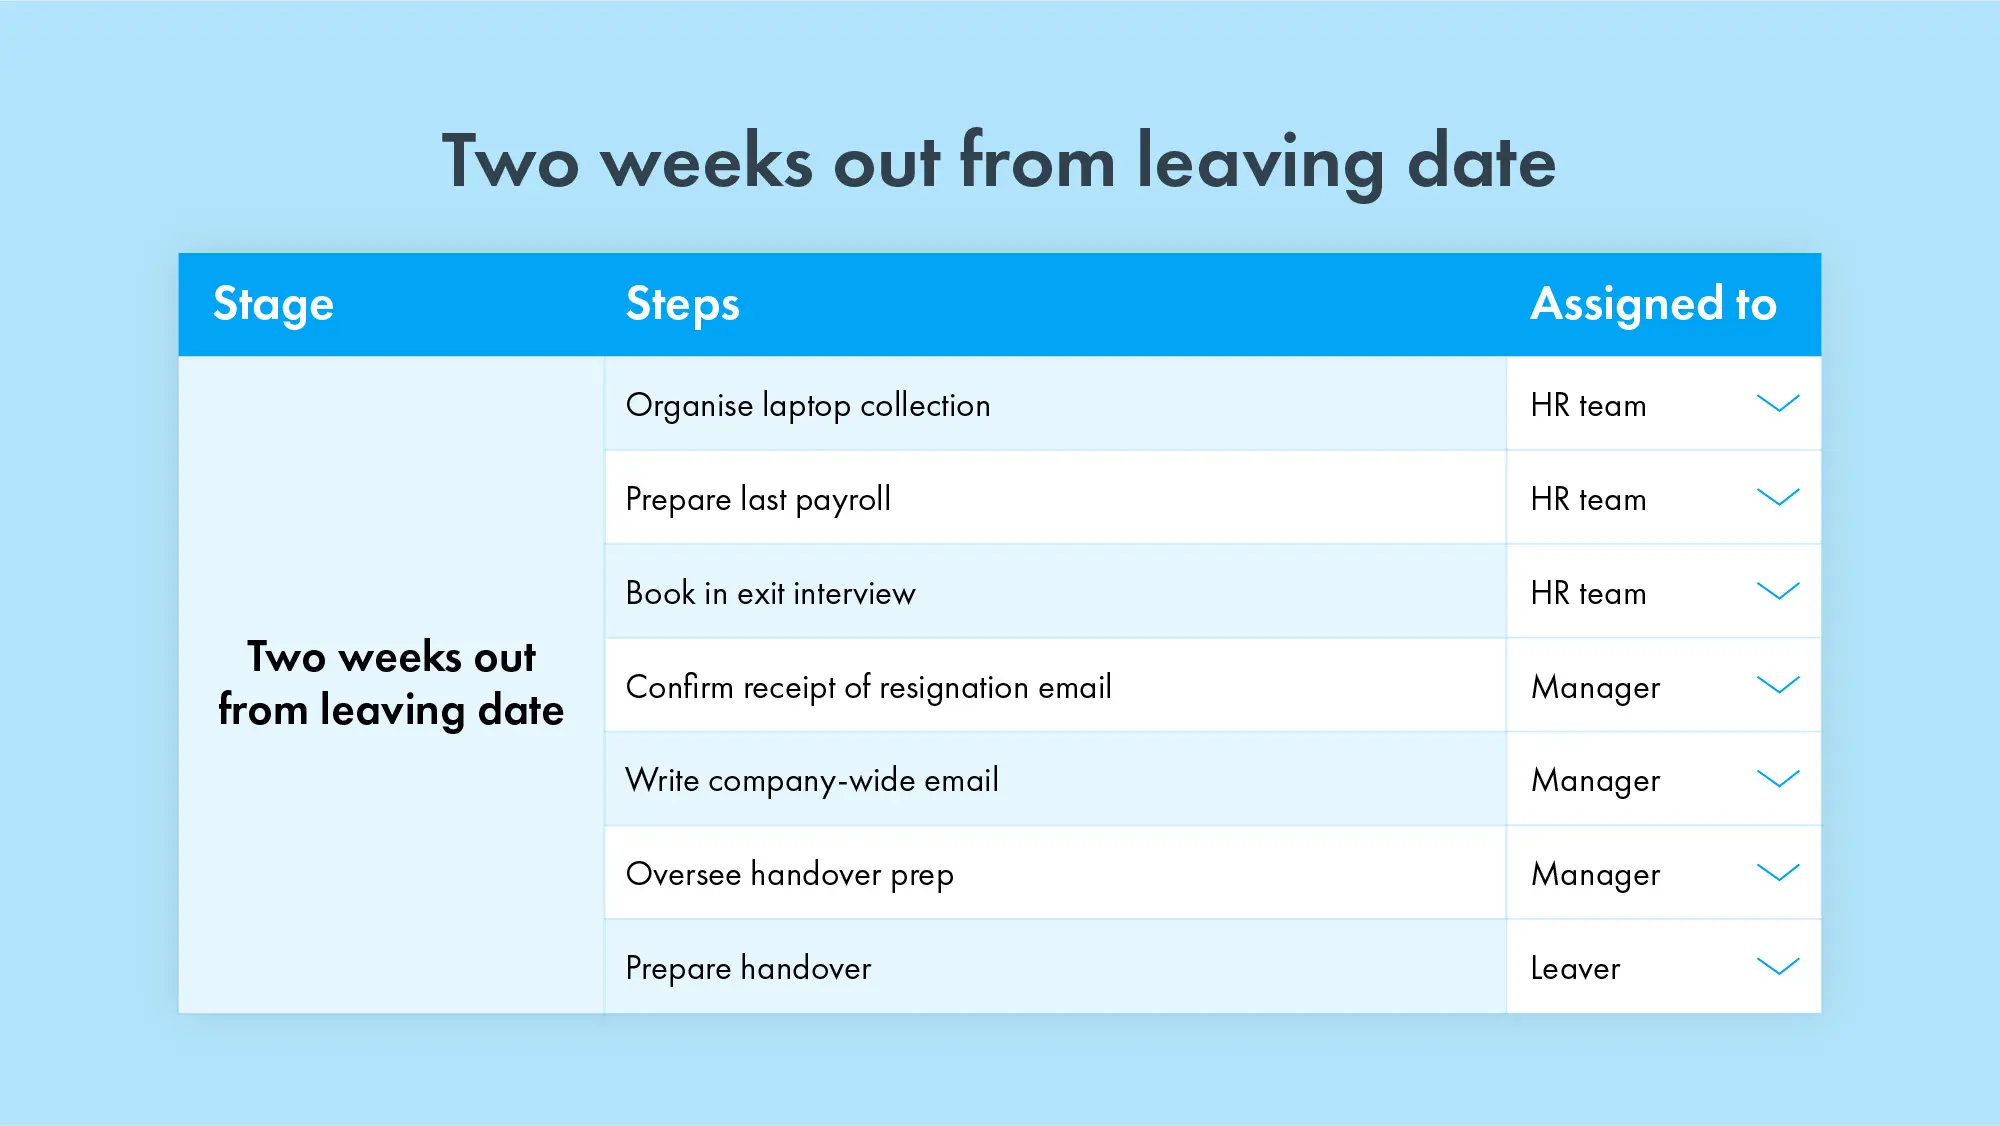 Summary of offboarding checklist: two weeks out from leaving date